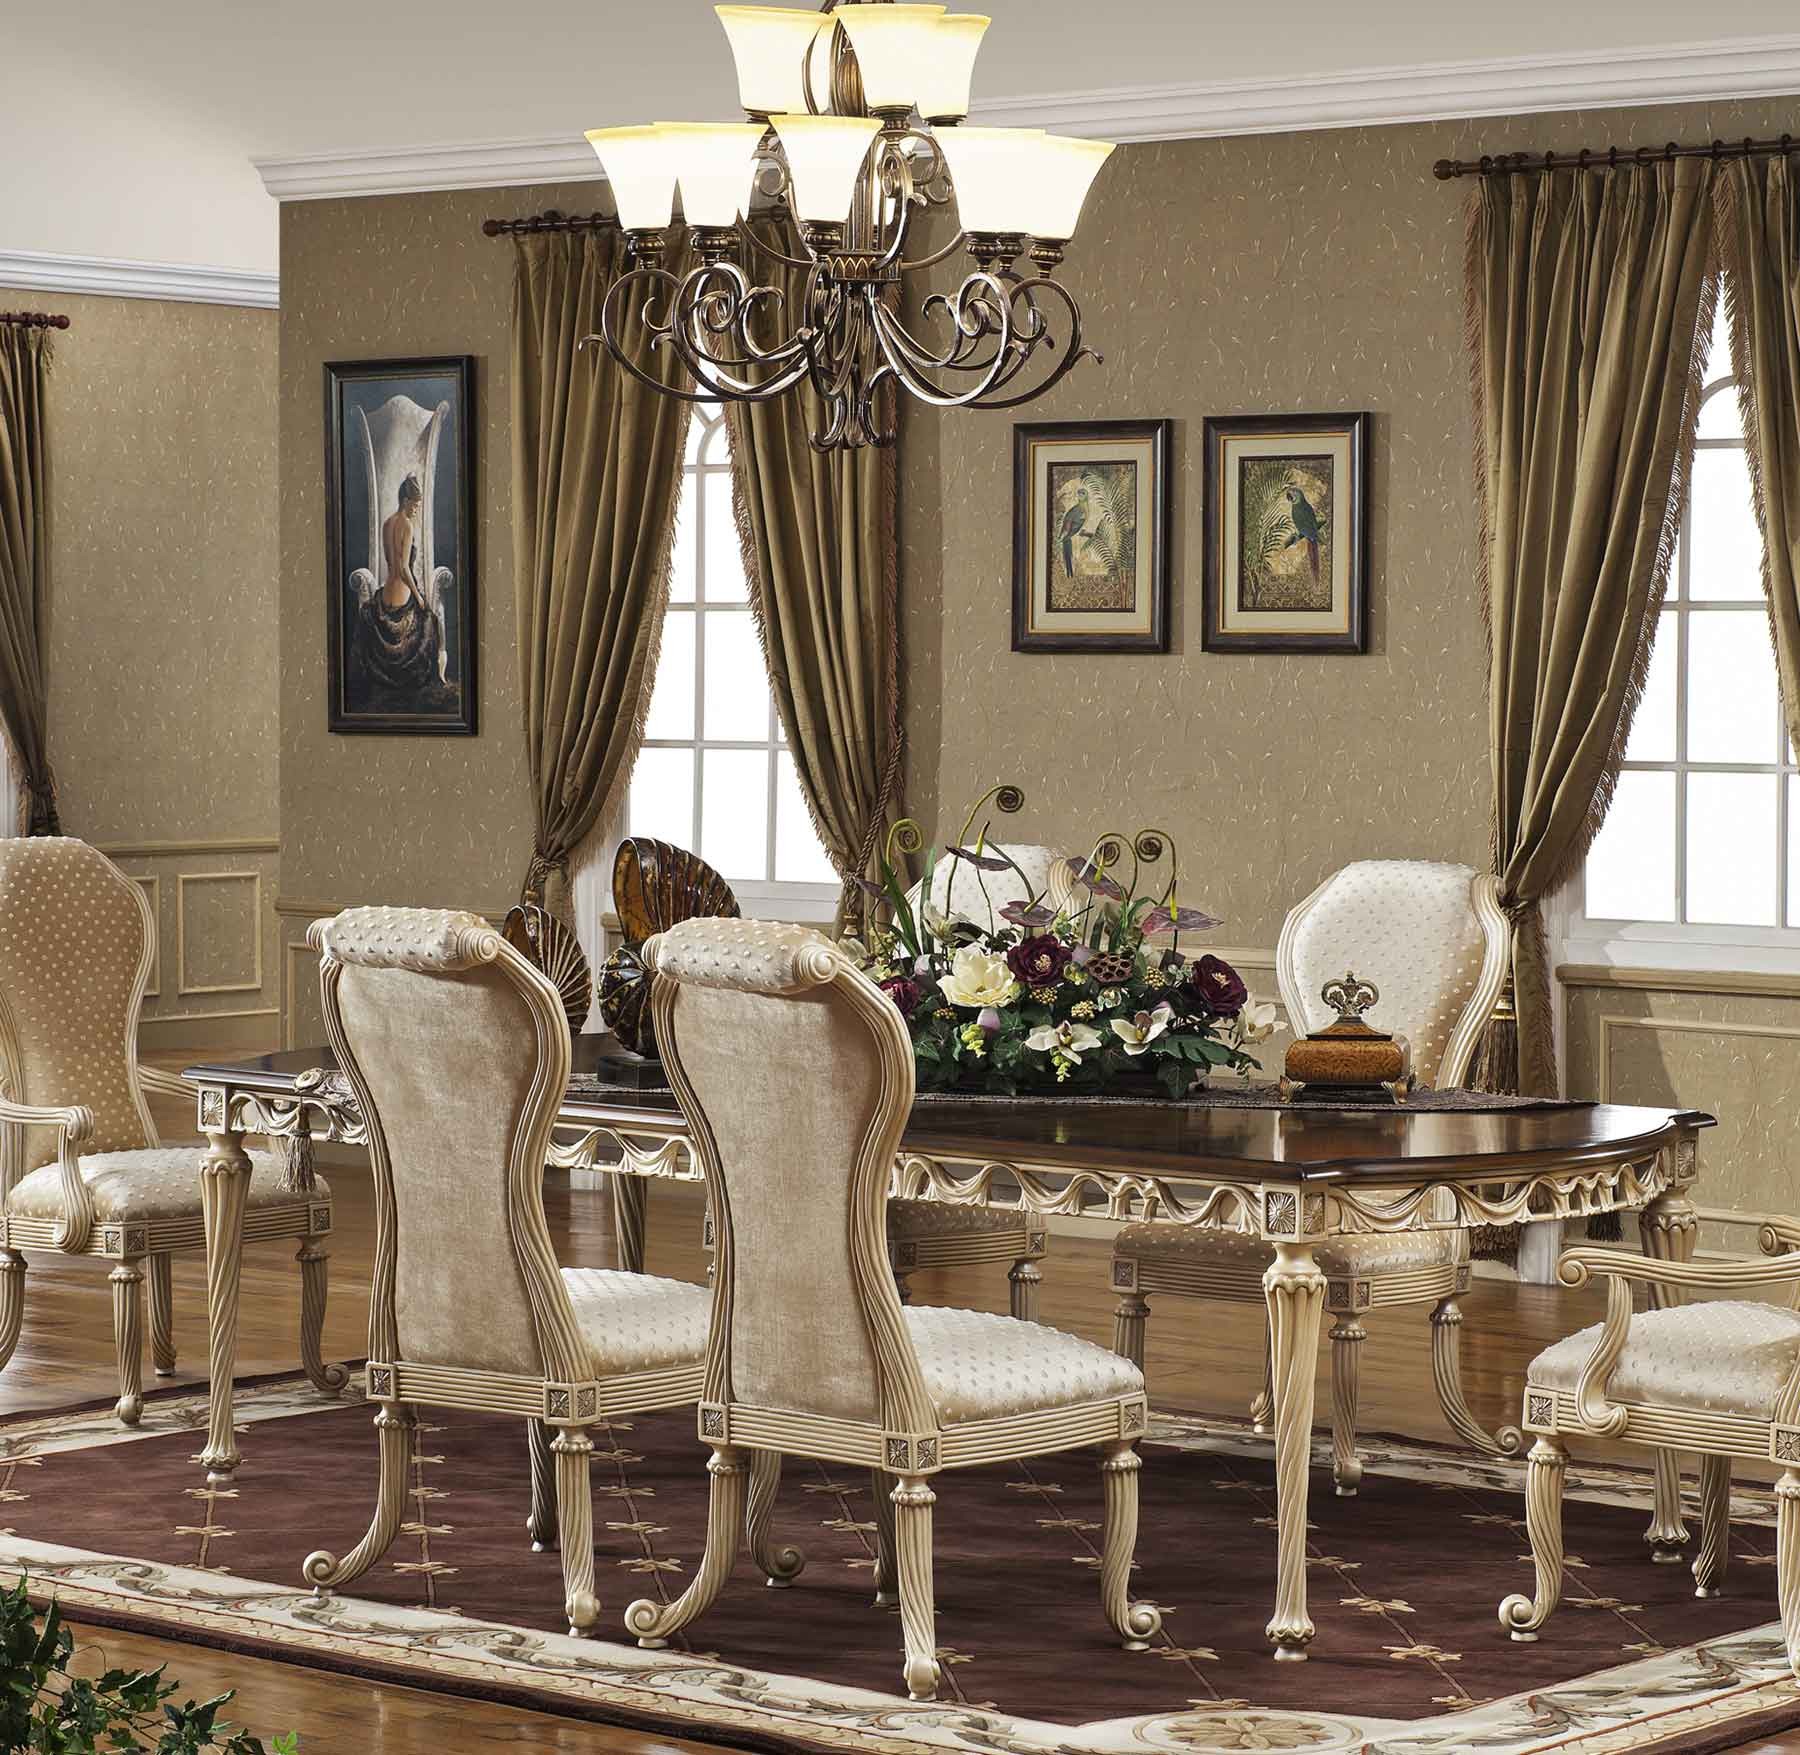 Casabella 7-pcs Dining Set shown in Egyptian Pearl with Antique Cognac top